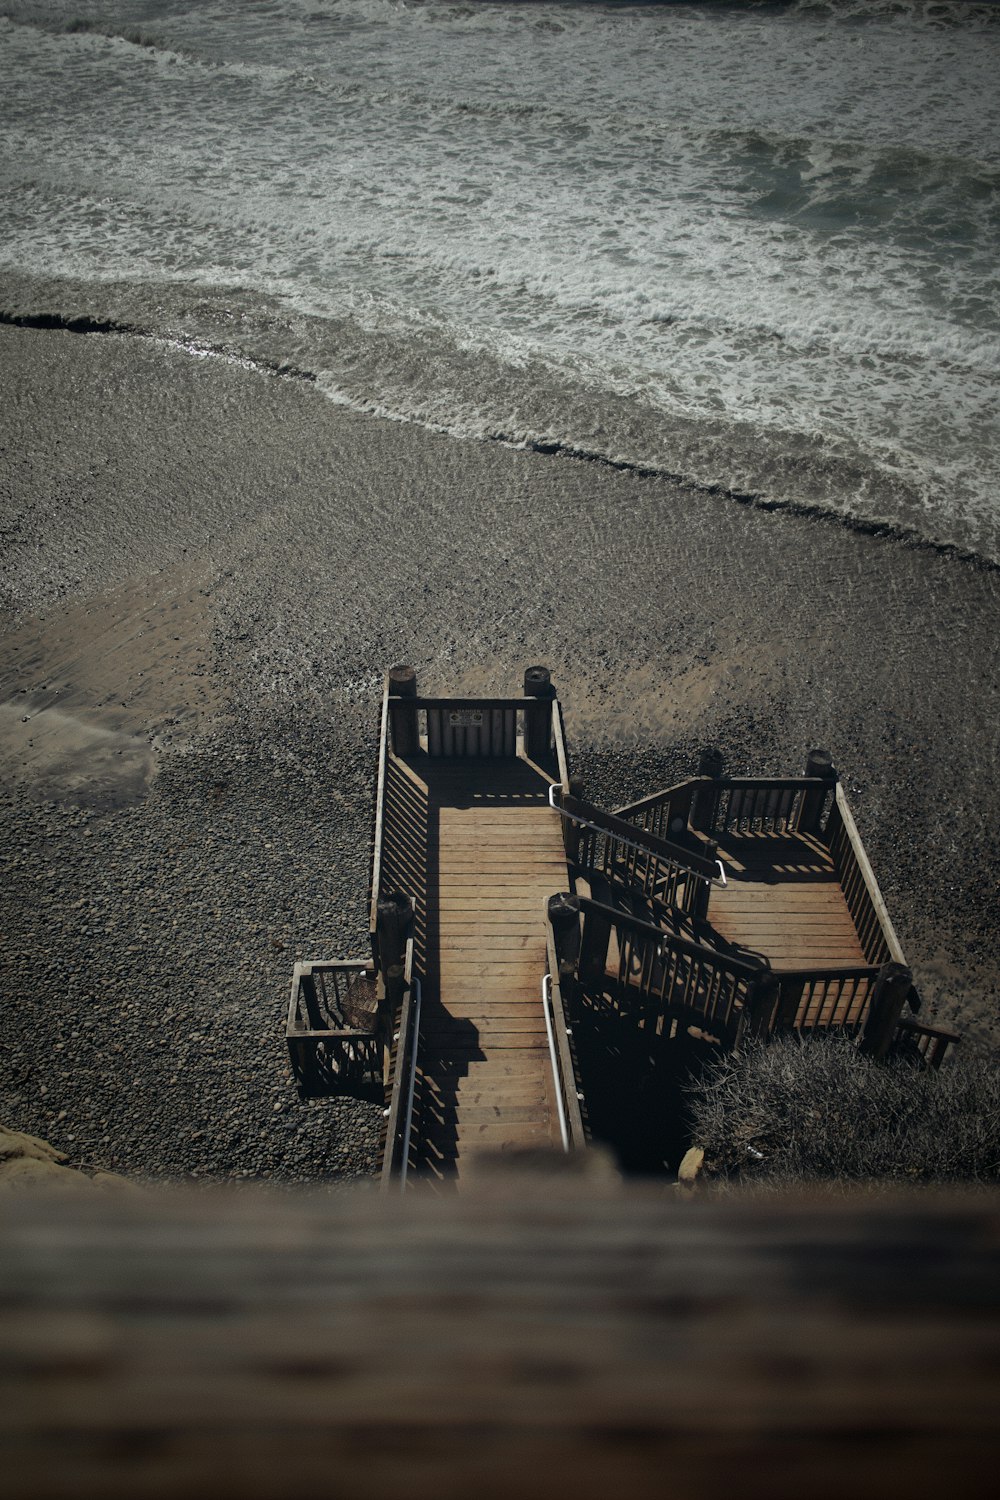 brown wooden chairs on beach shore during daytime